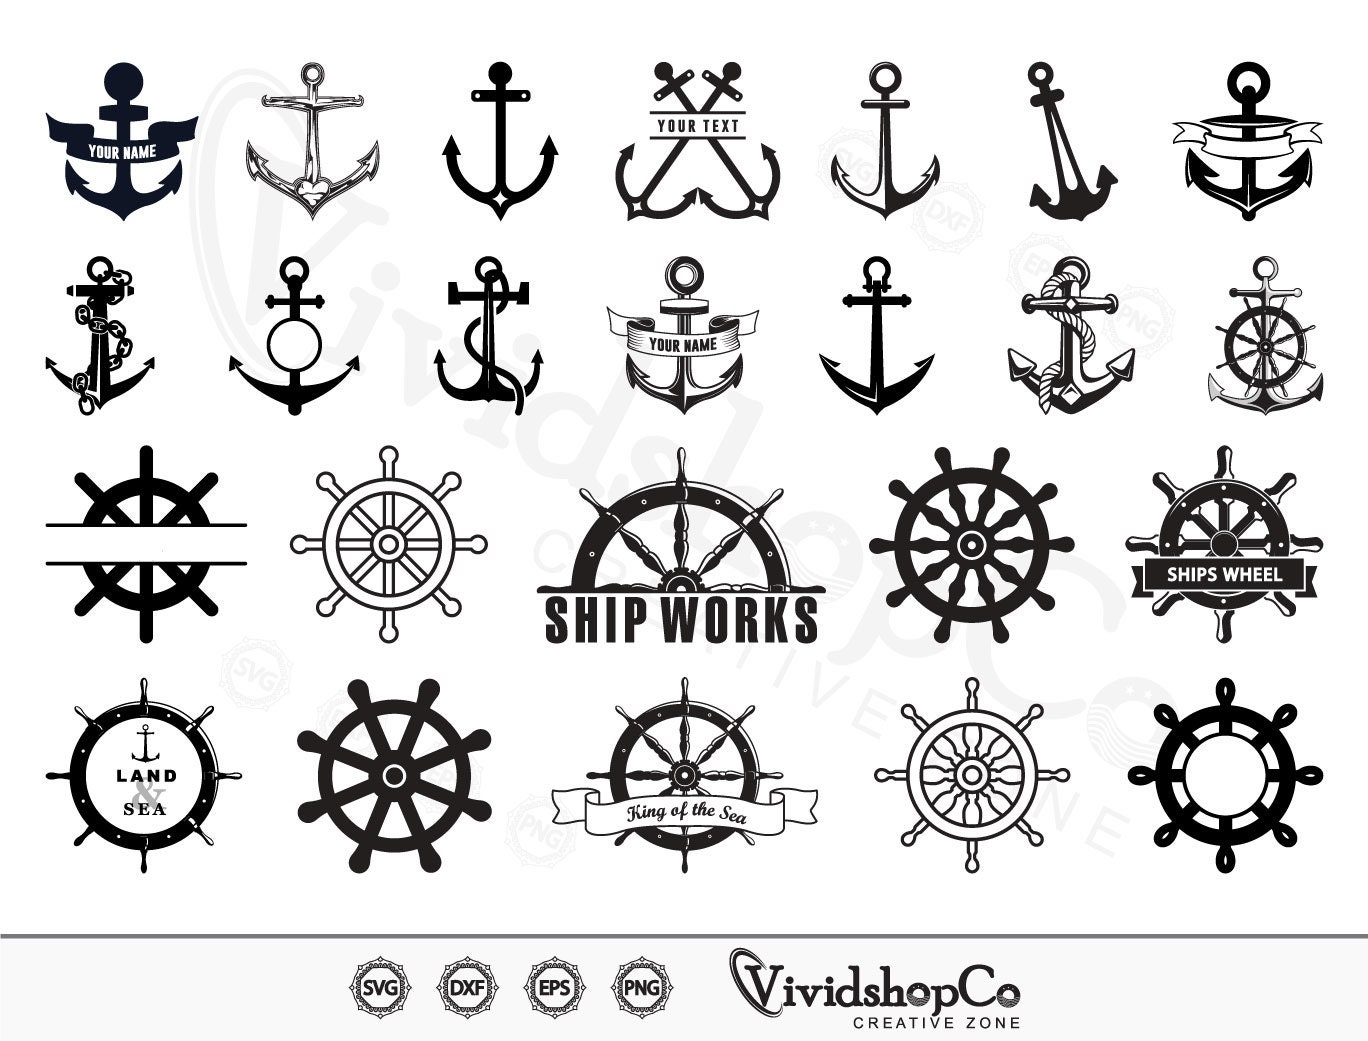 Buy Ship Wheel Svg Online In India -  India